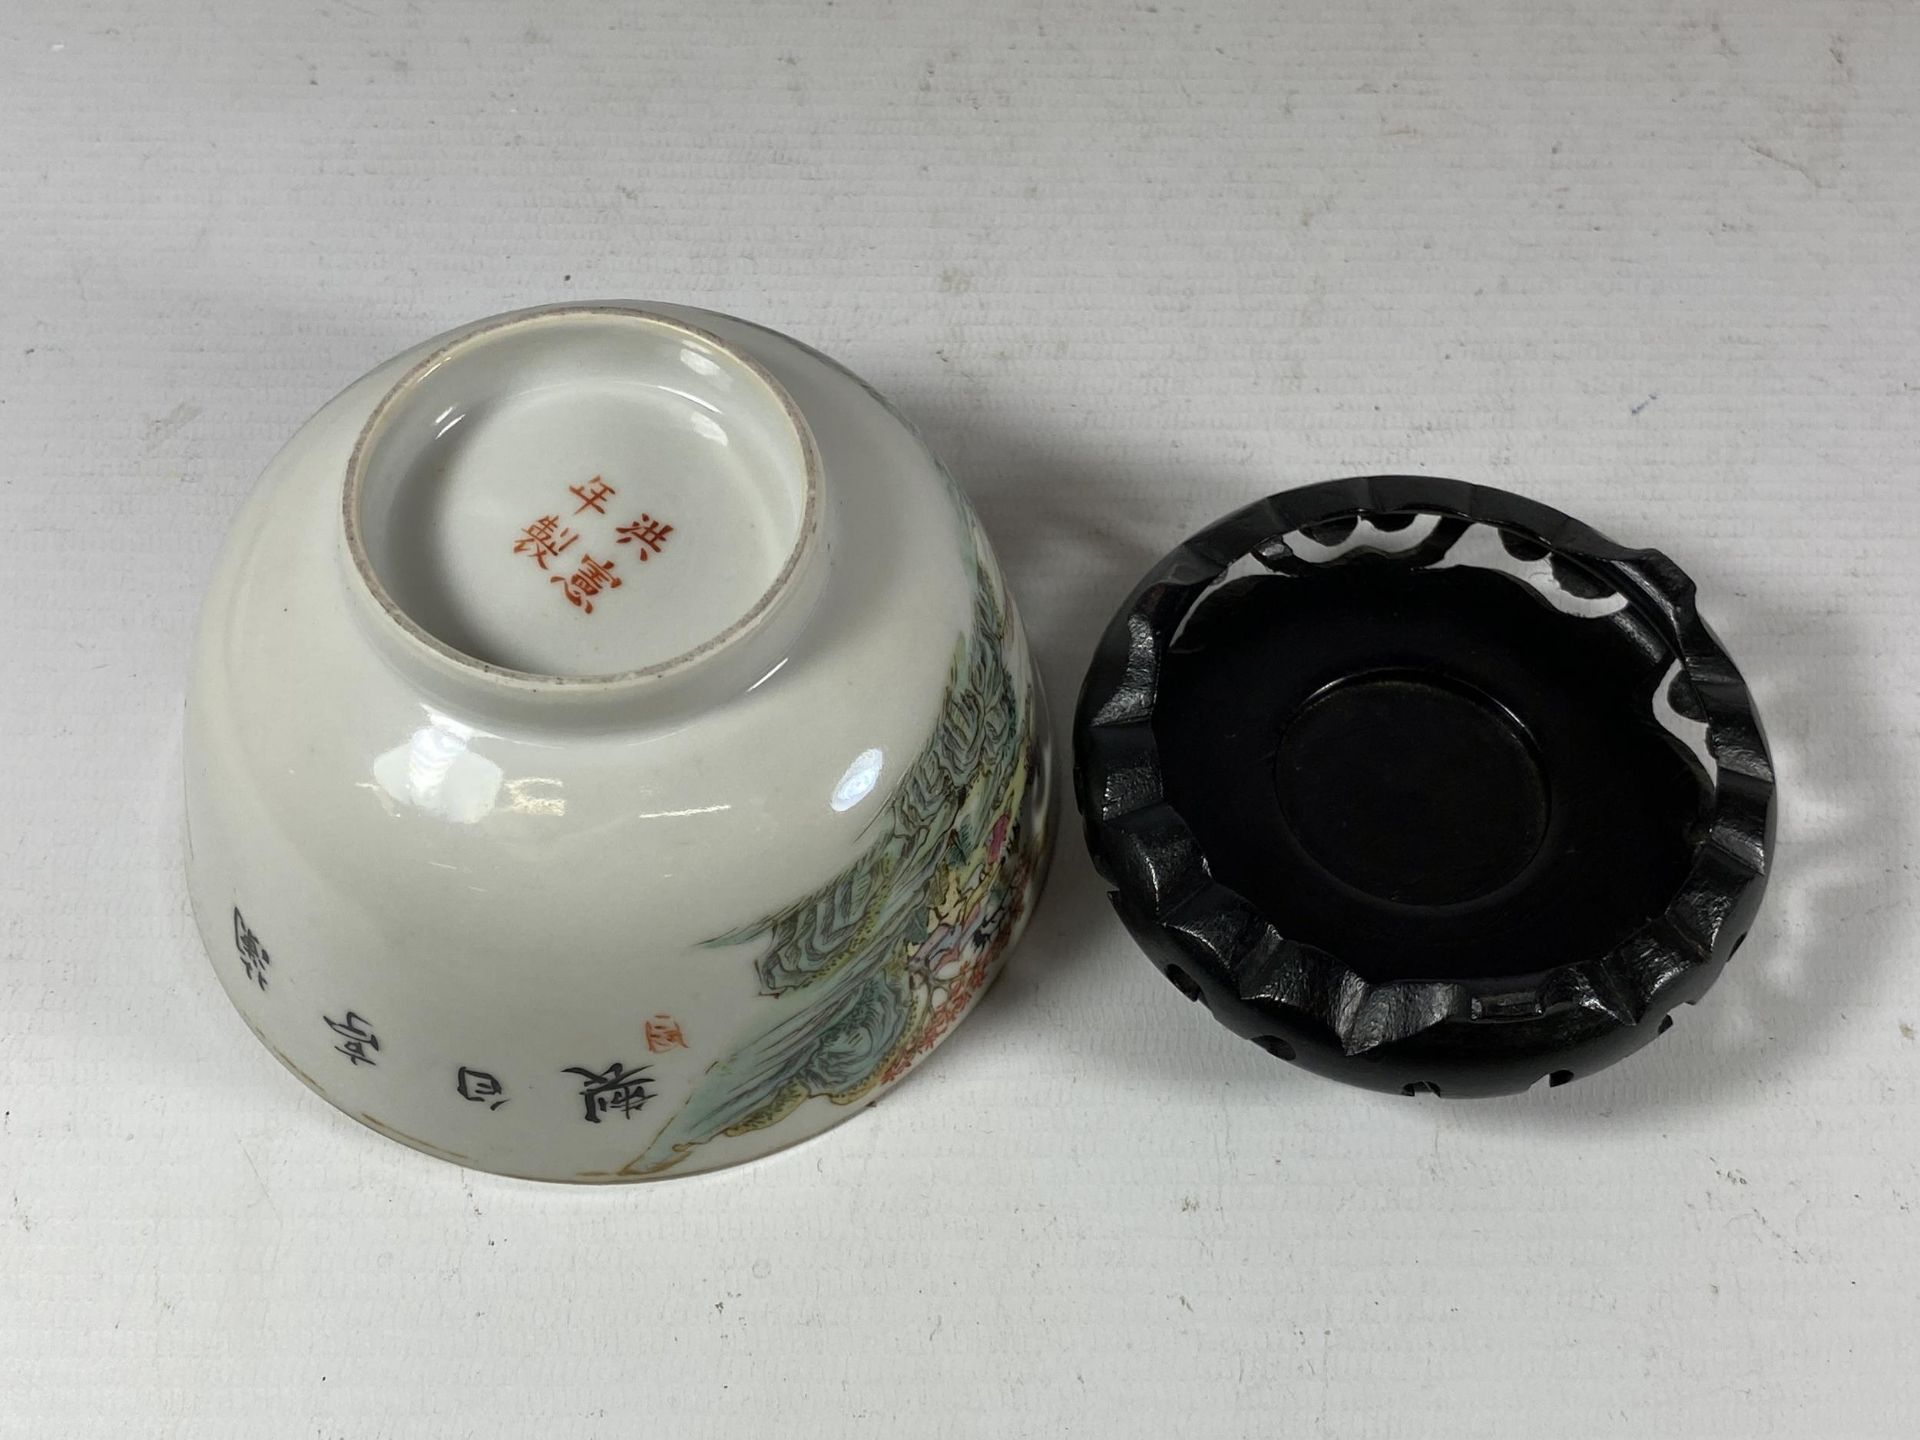 AN EARLY 20TH CENTURY CHINESE PORCELAIN BOWL ON WOODEN STAND, FOUR CHARACTER MARK TO BASE, - Image 4 of 6